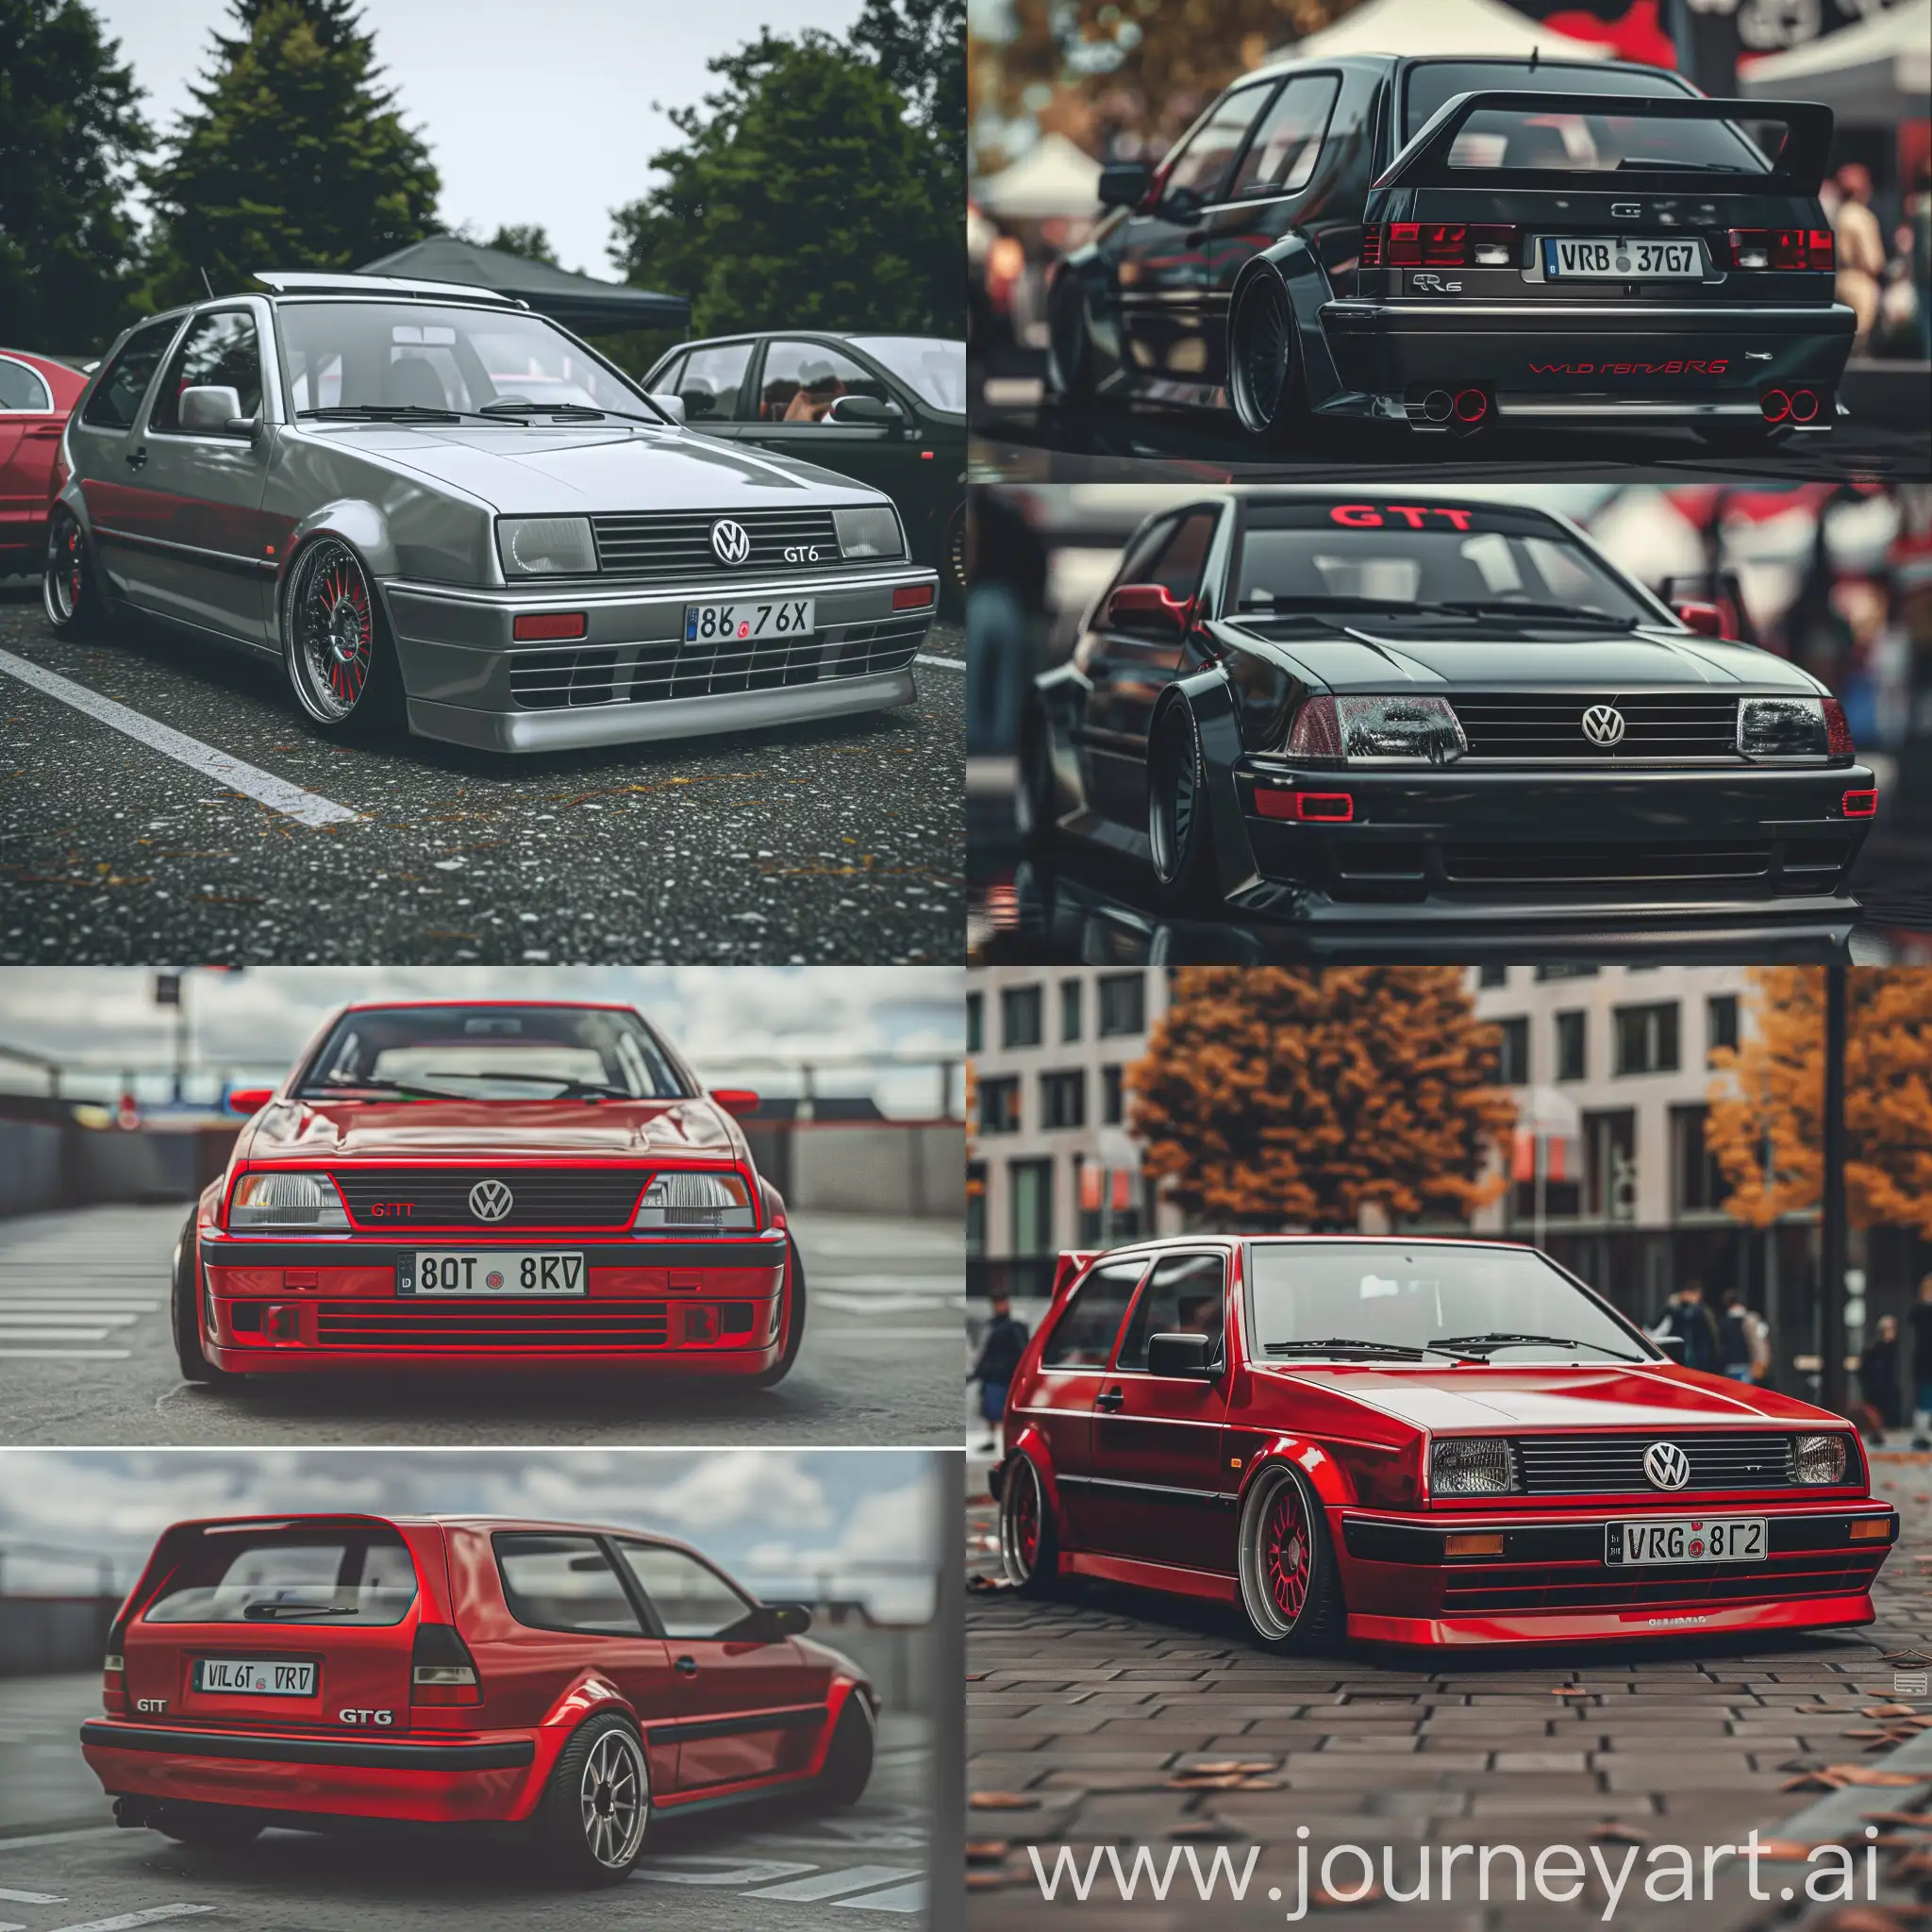 Realistic Volkswagen Golf mk3 from 1995 vr6 gti hatchback golf 3 gti vr6 spotted in car meet in Germany realistic 8k detailed 